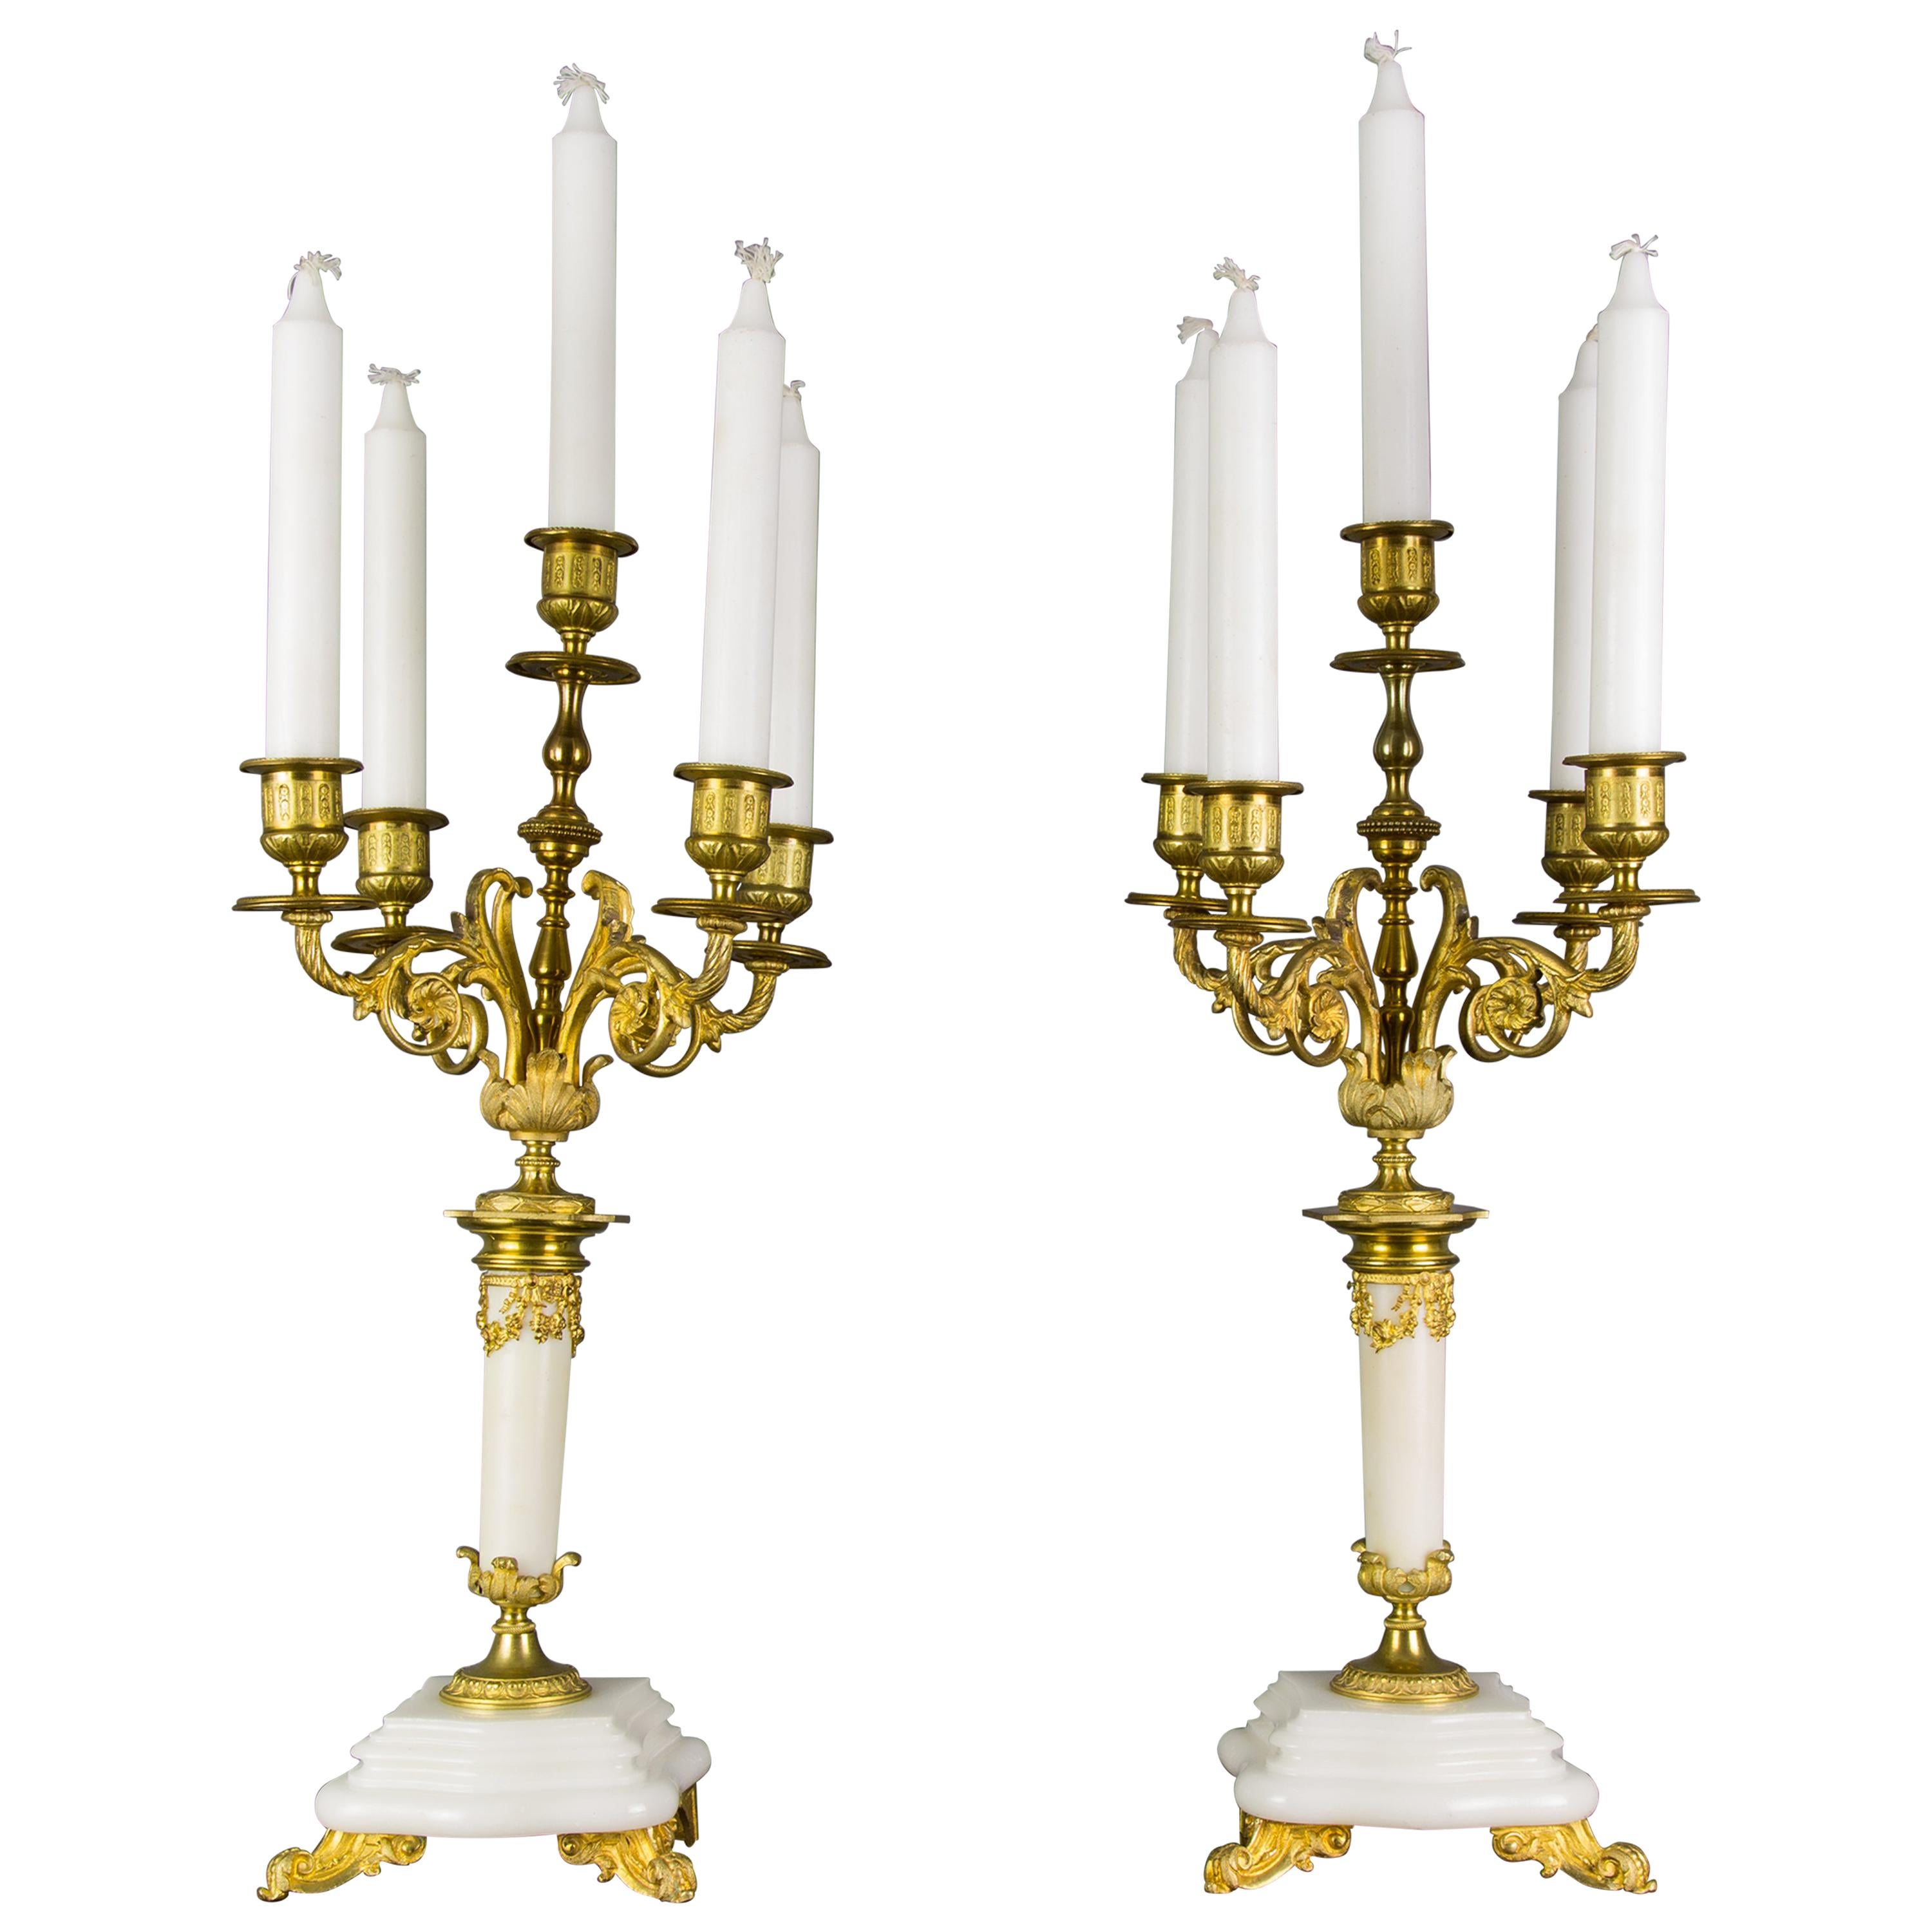 Pair of Louis XVI Style Gilt Bronze and White Marble Five-Light Candelabras